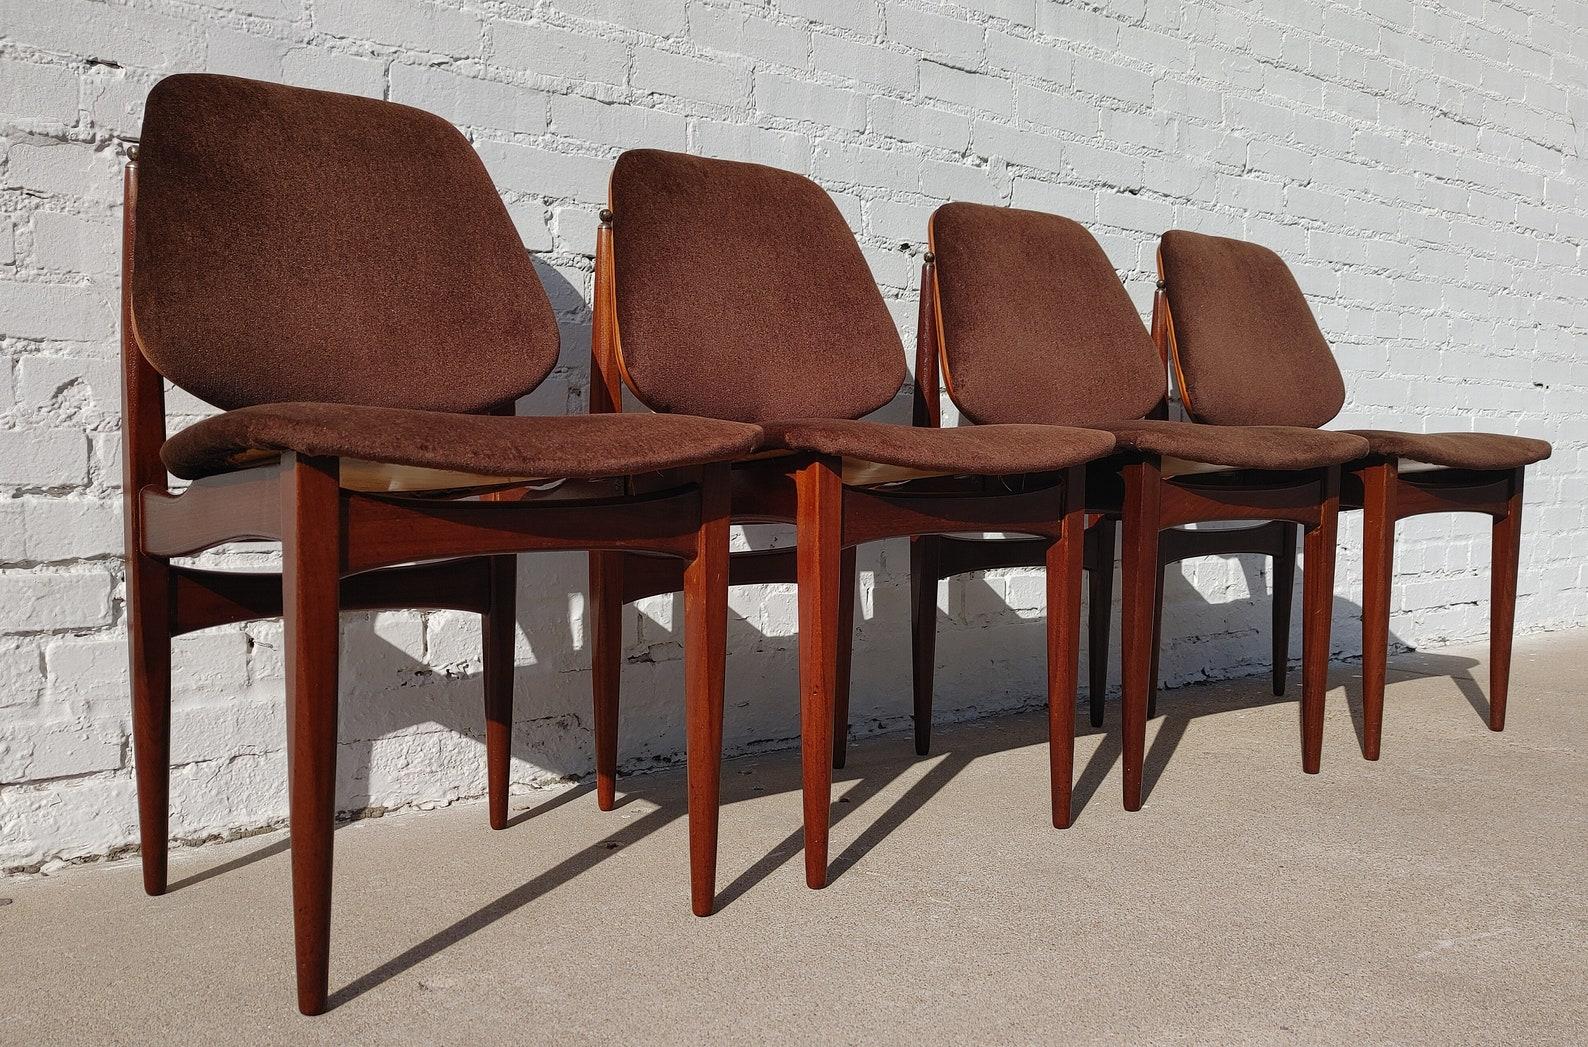 Set of 4 Mid Century English Modern Elliott's of Newbury Dining Chairs

Above average vintage condition and structurally sound. Has some expected slight finish wear and scratching to the frames. Fabric is in above average condition with very little